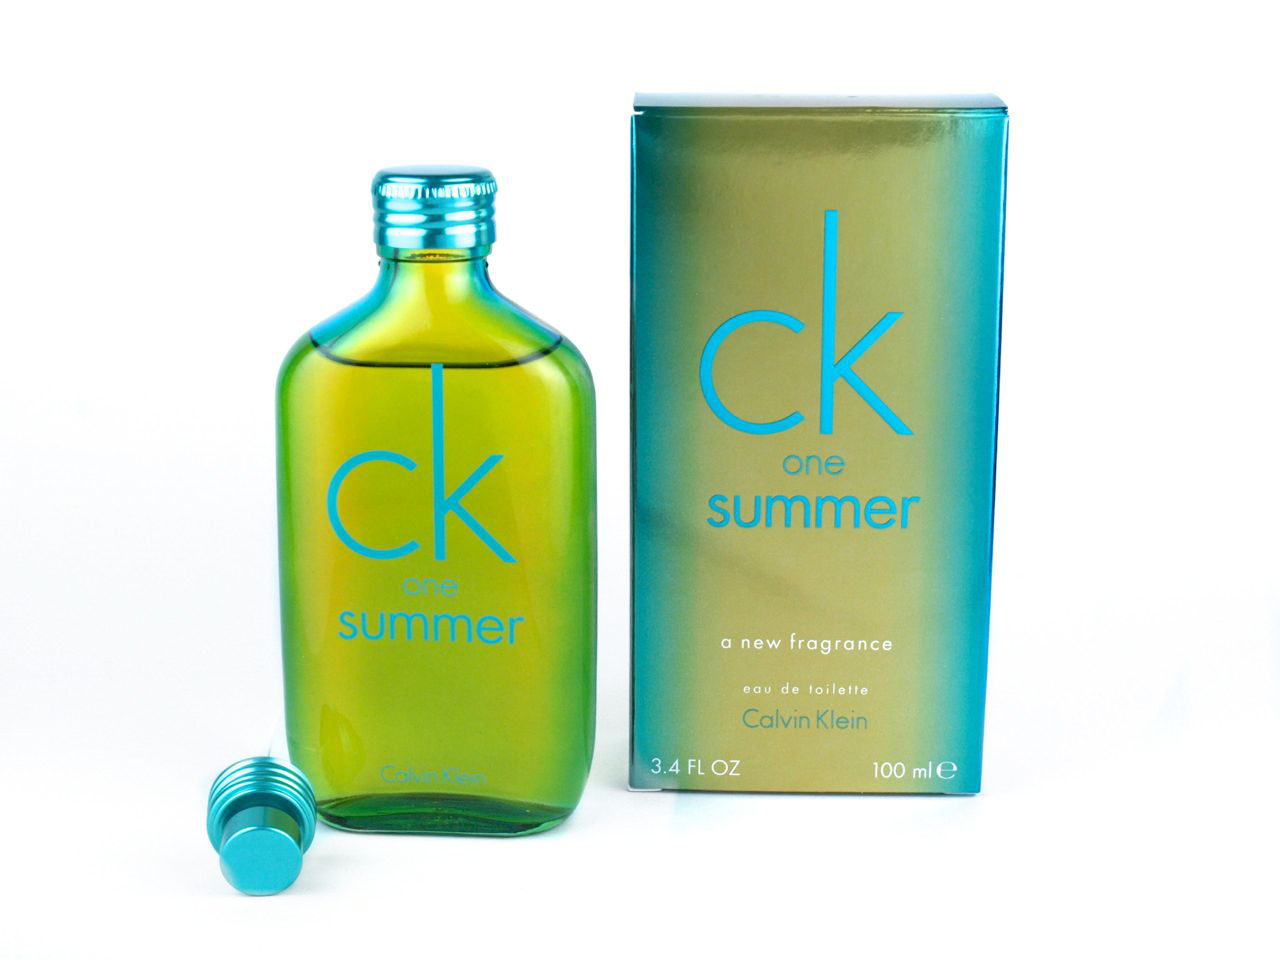 Calvin Klein CK One Summer 2014 Eau de Toilette Spray: Review The Happy Beauty, Makeup, and Skincare Blog with Reviews and Swatches